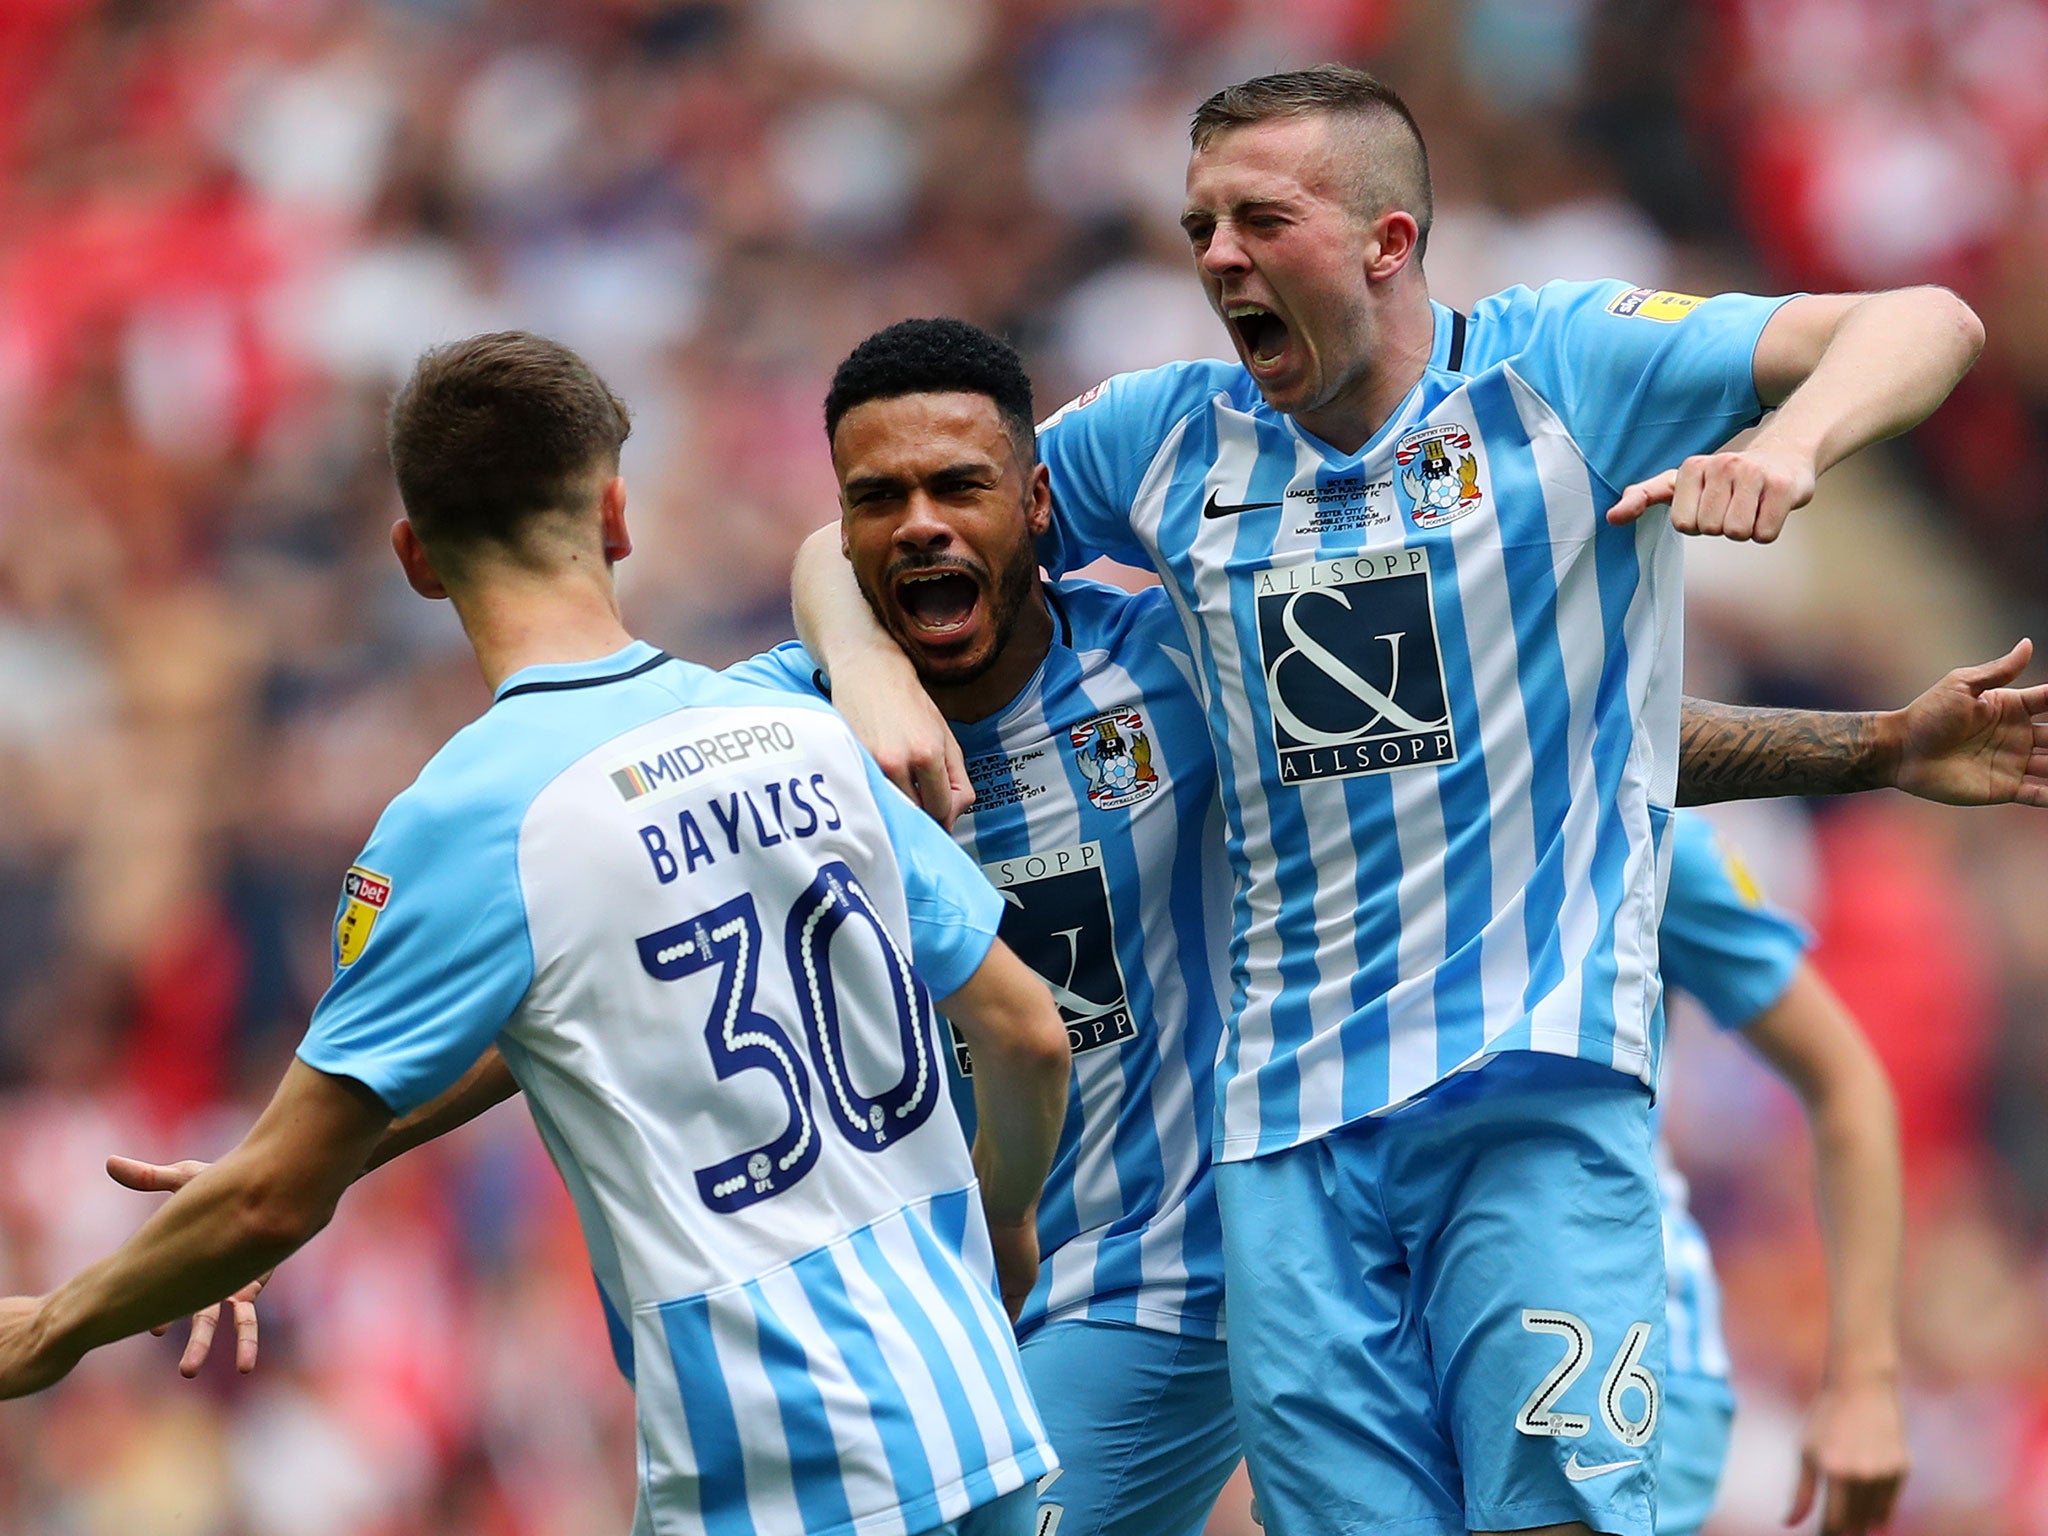 Jordan Willis celebrates with his Coventry team mates after scoring his side's first goal